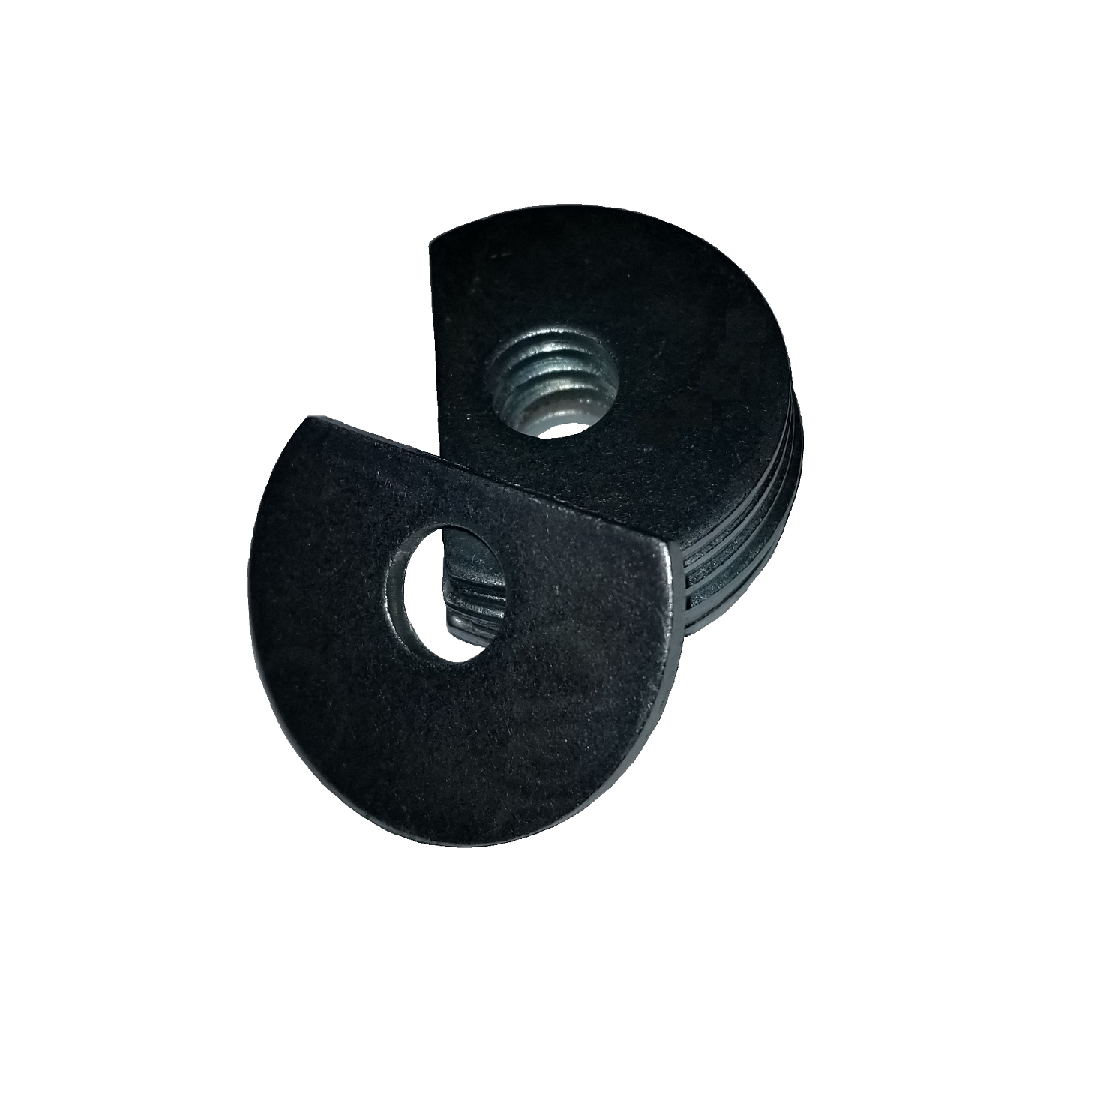 Clipped OD Washer - 0.390 ID, 0.750 OD, 0.125 Thick, Spring Steel - Hard